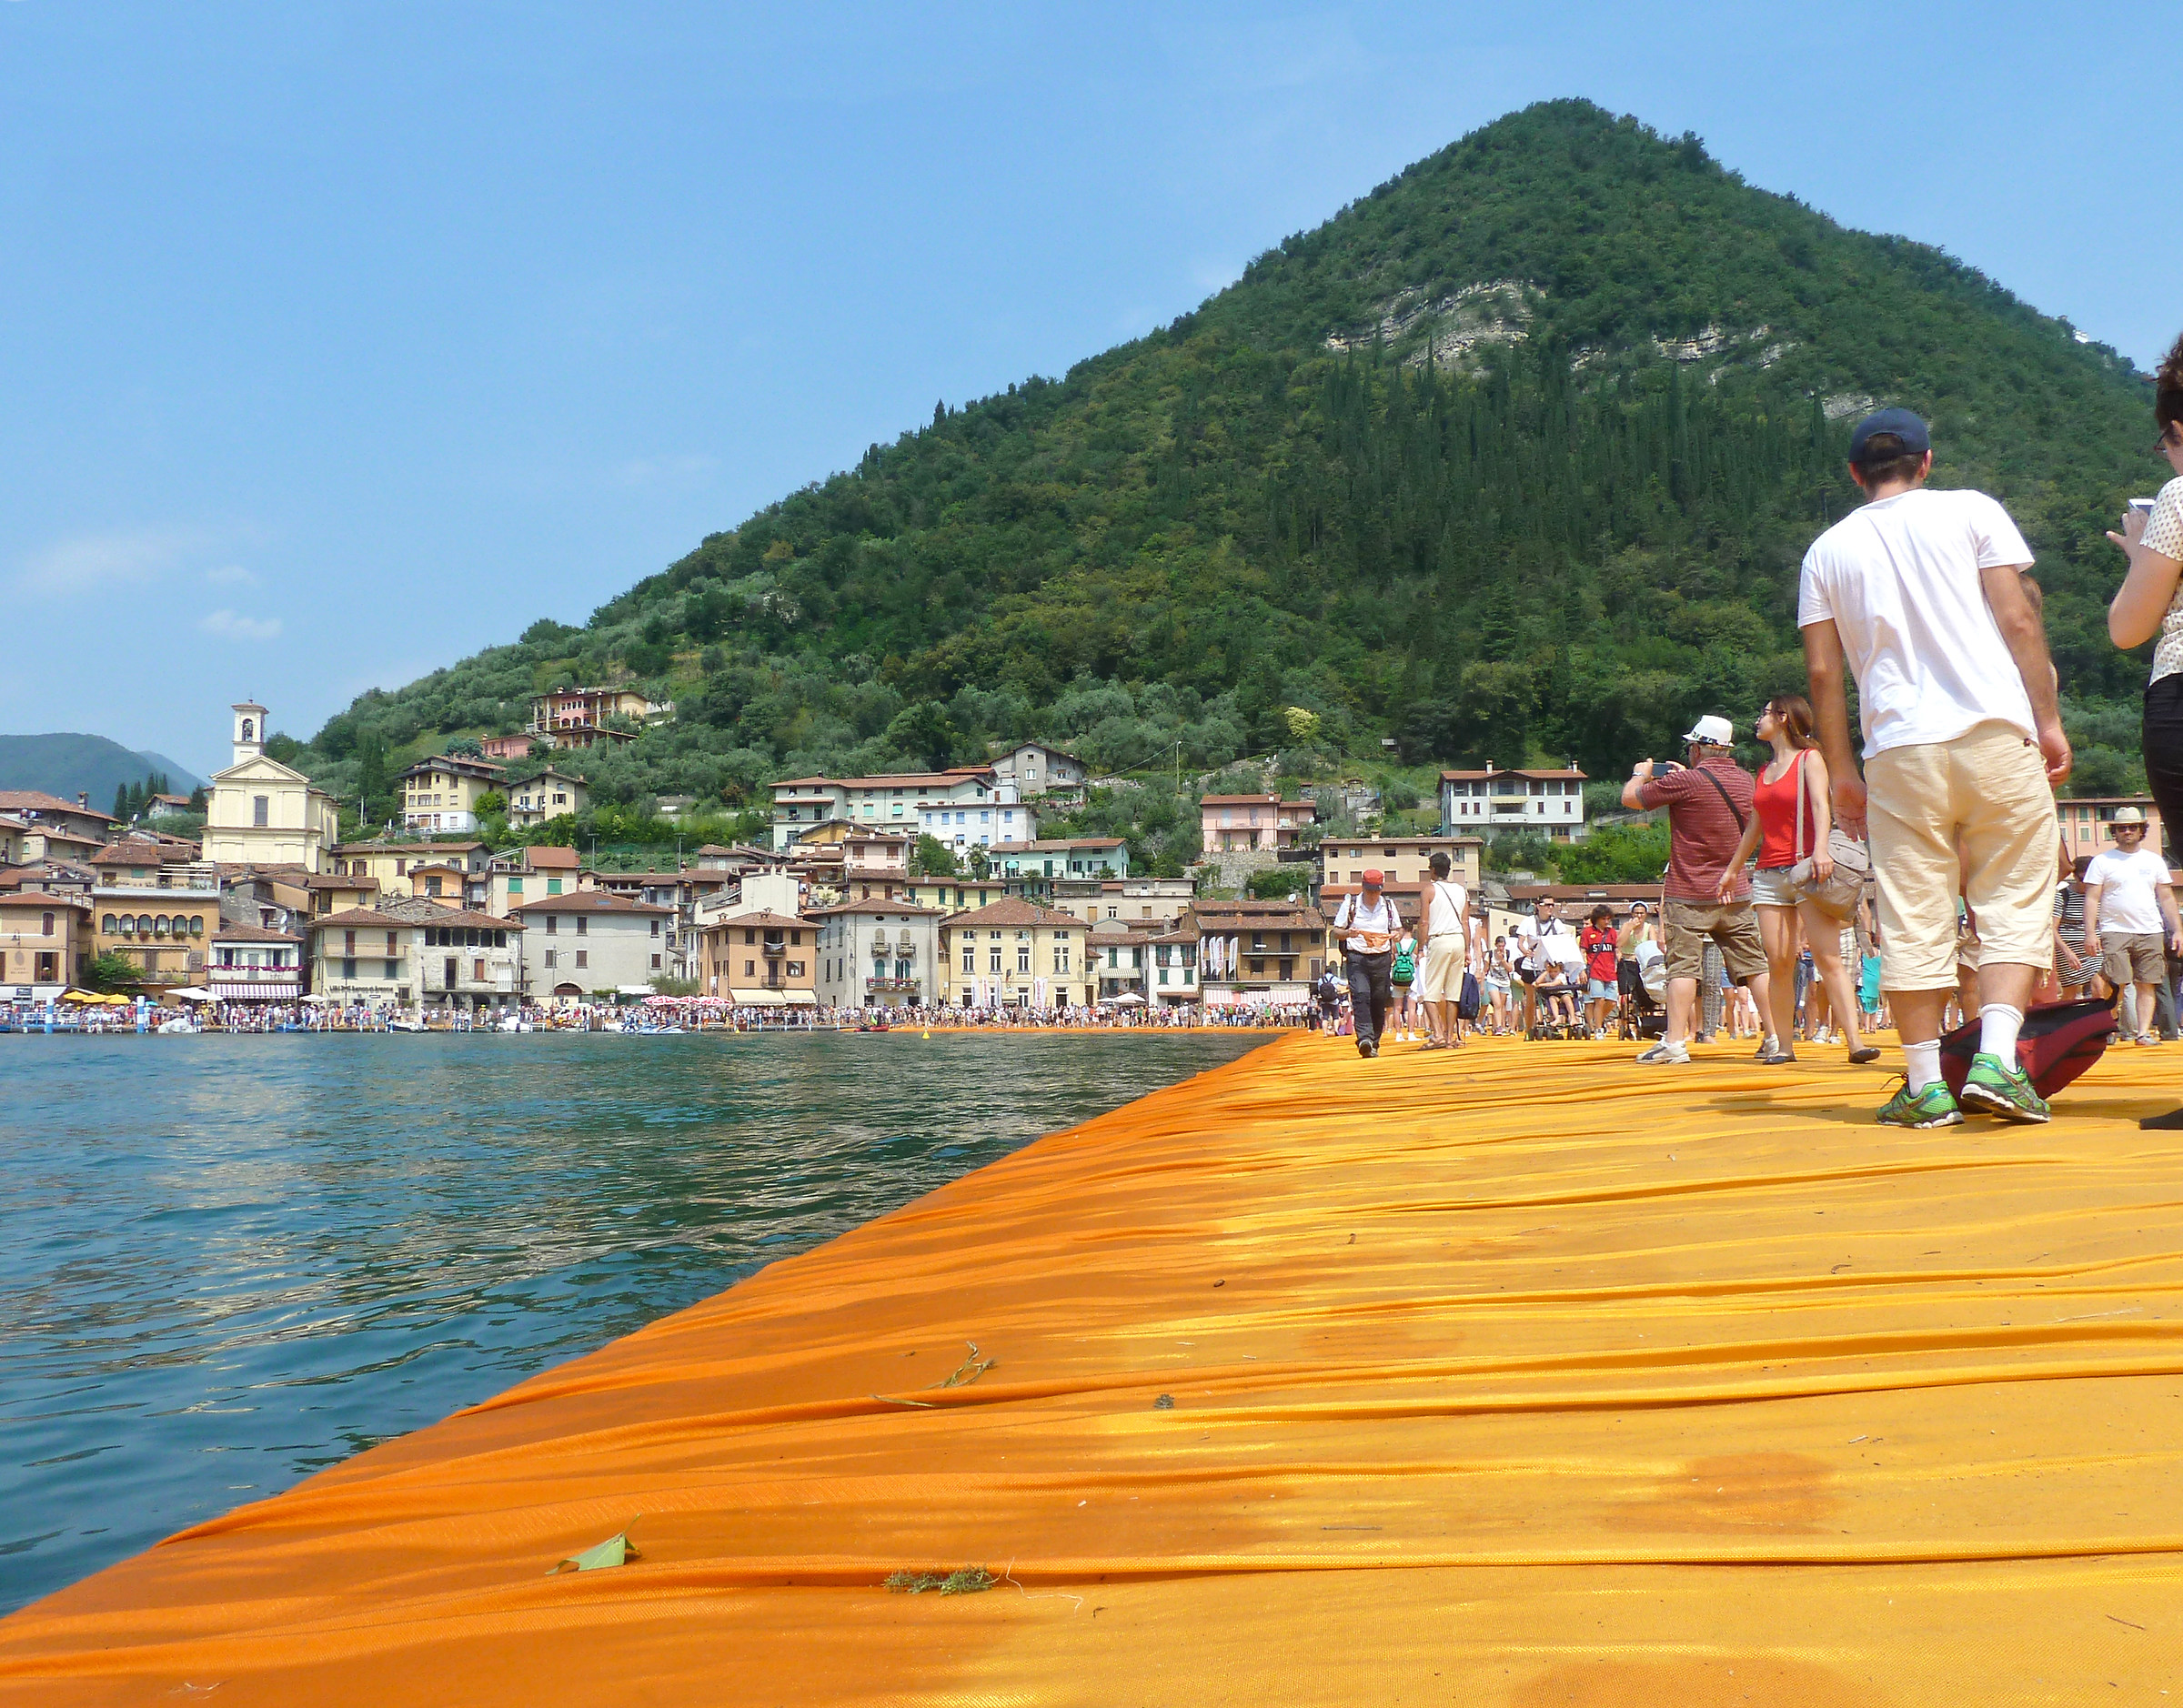 The Floating Piers June 30, 2016...